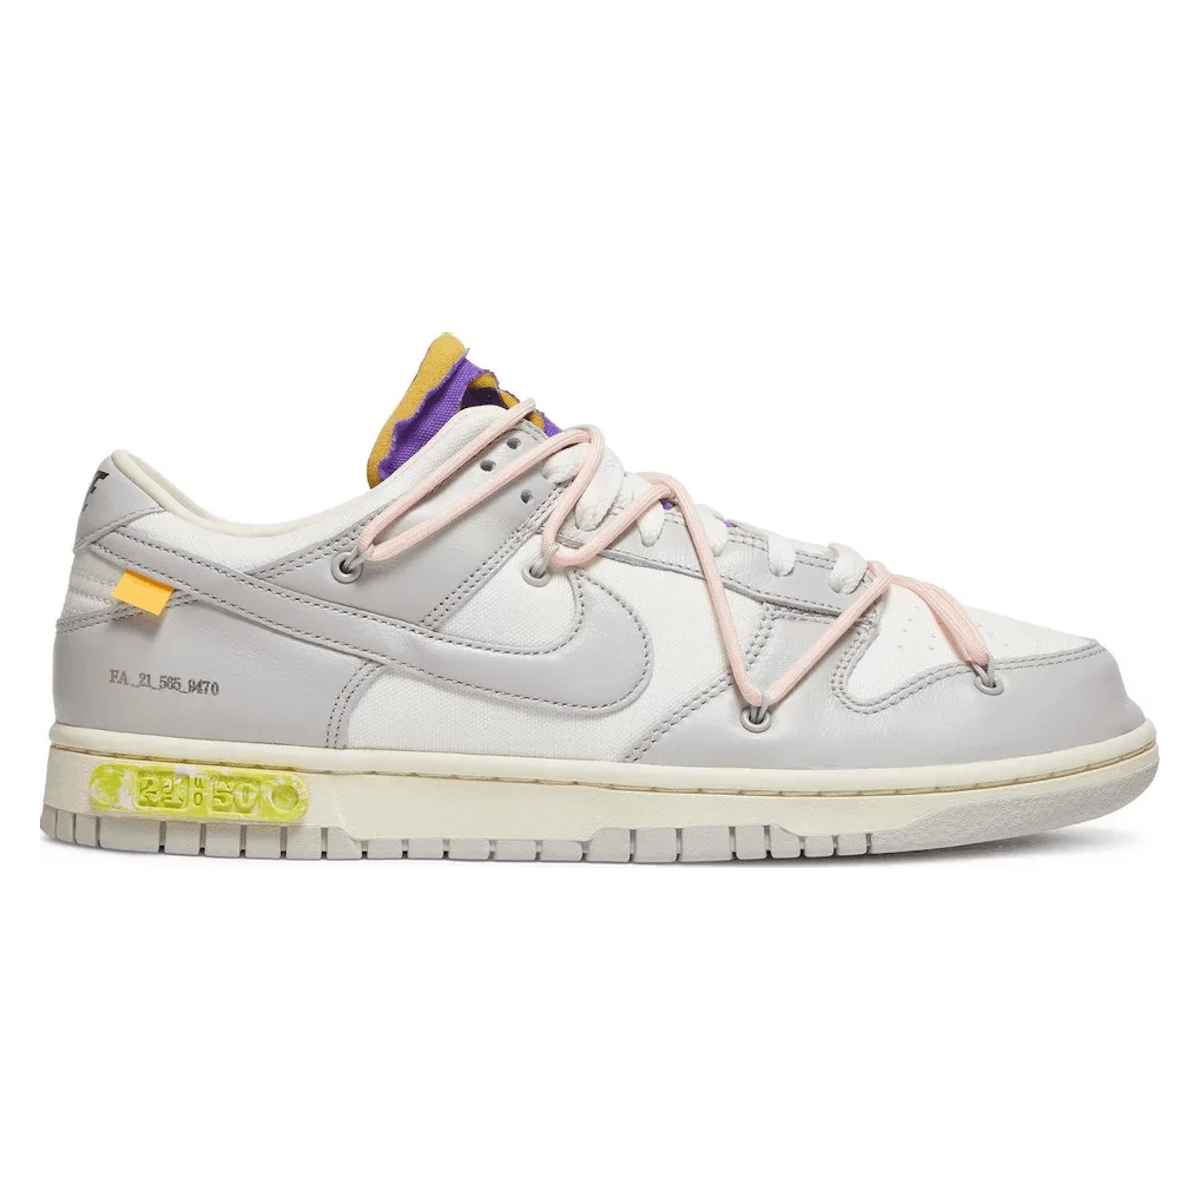 Off-White x Nike Dunk Low "Lot 24 of 50"